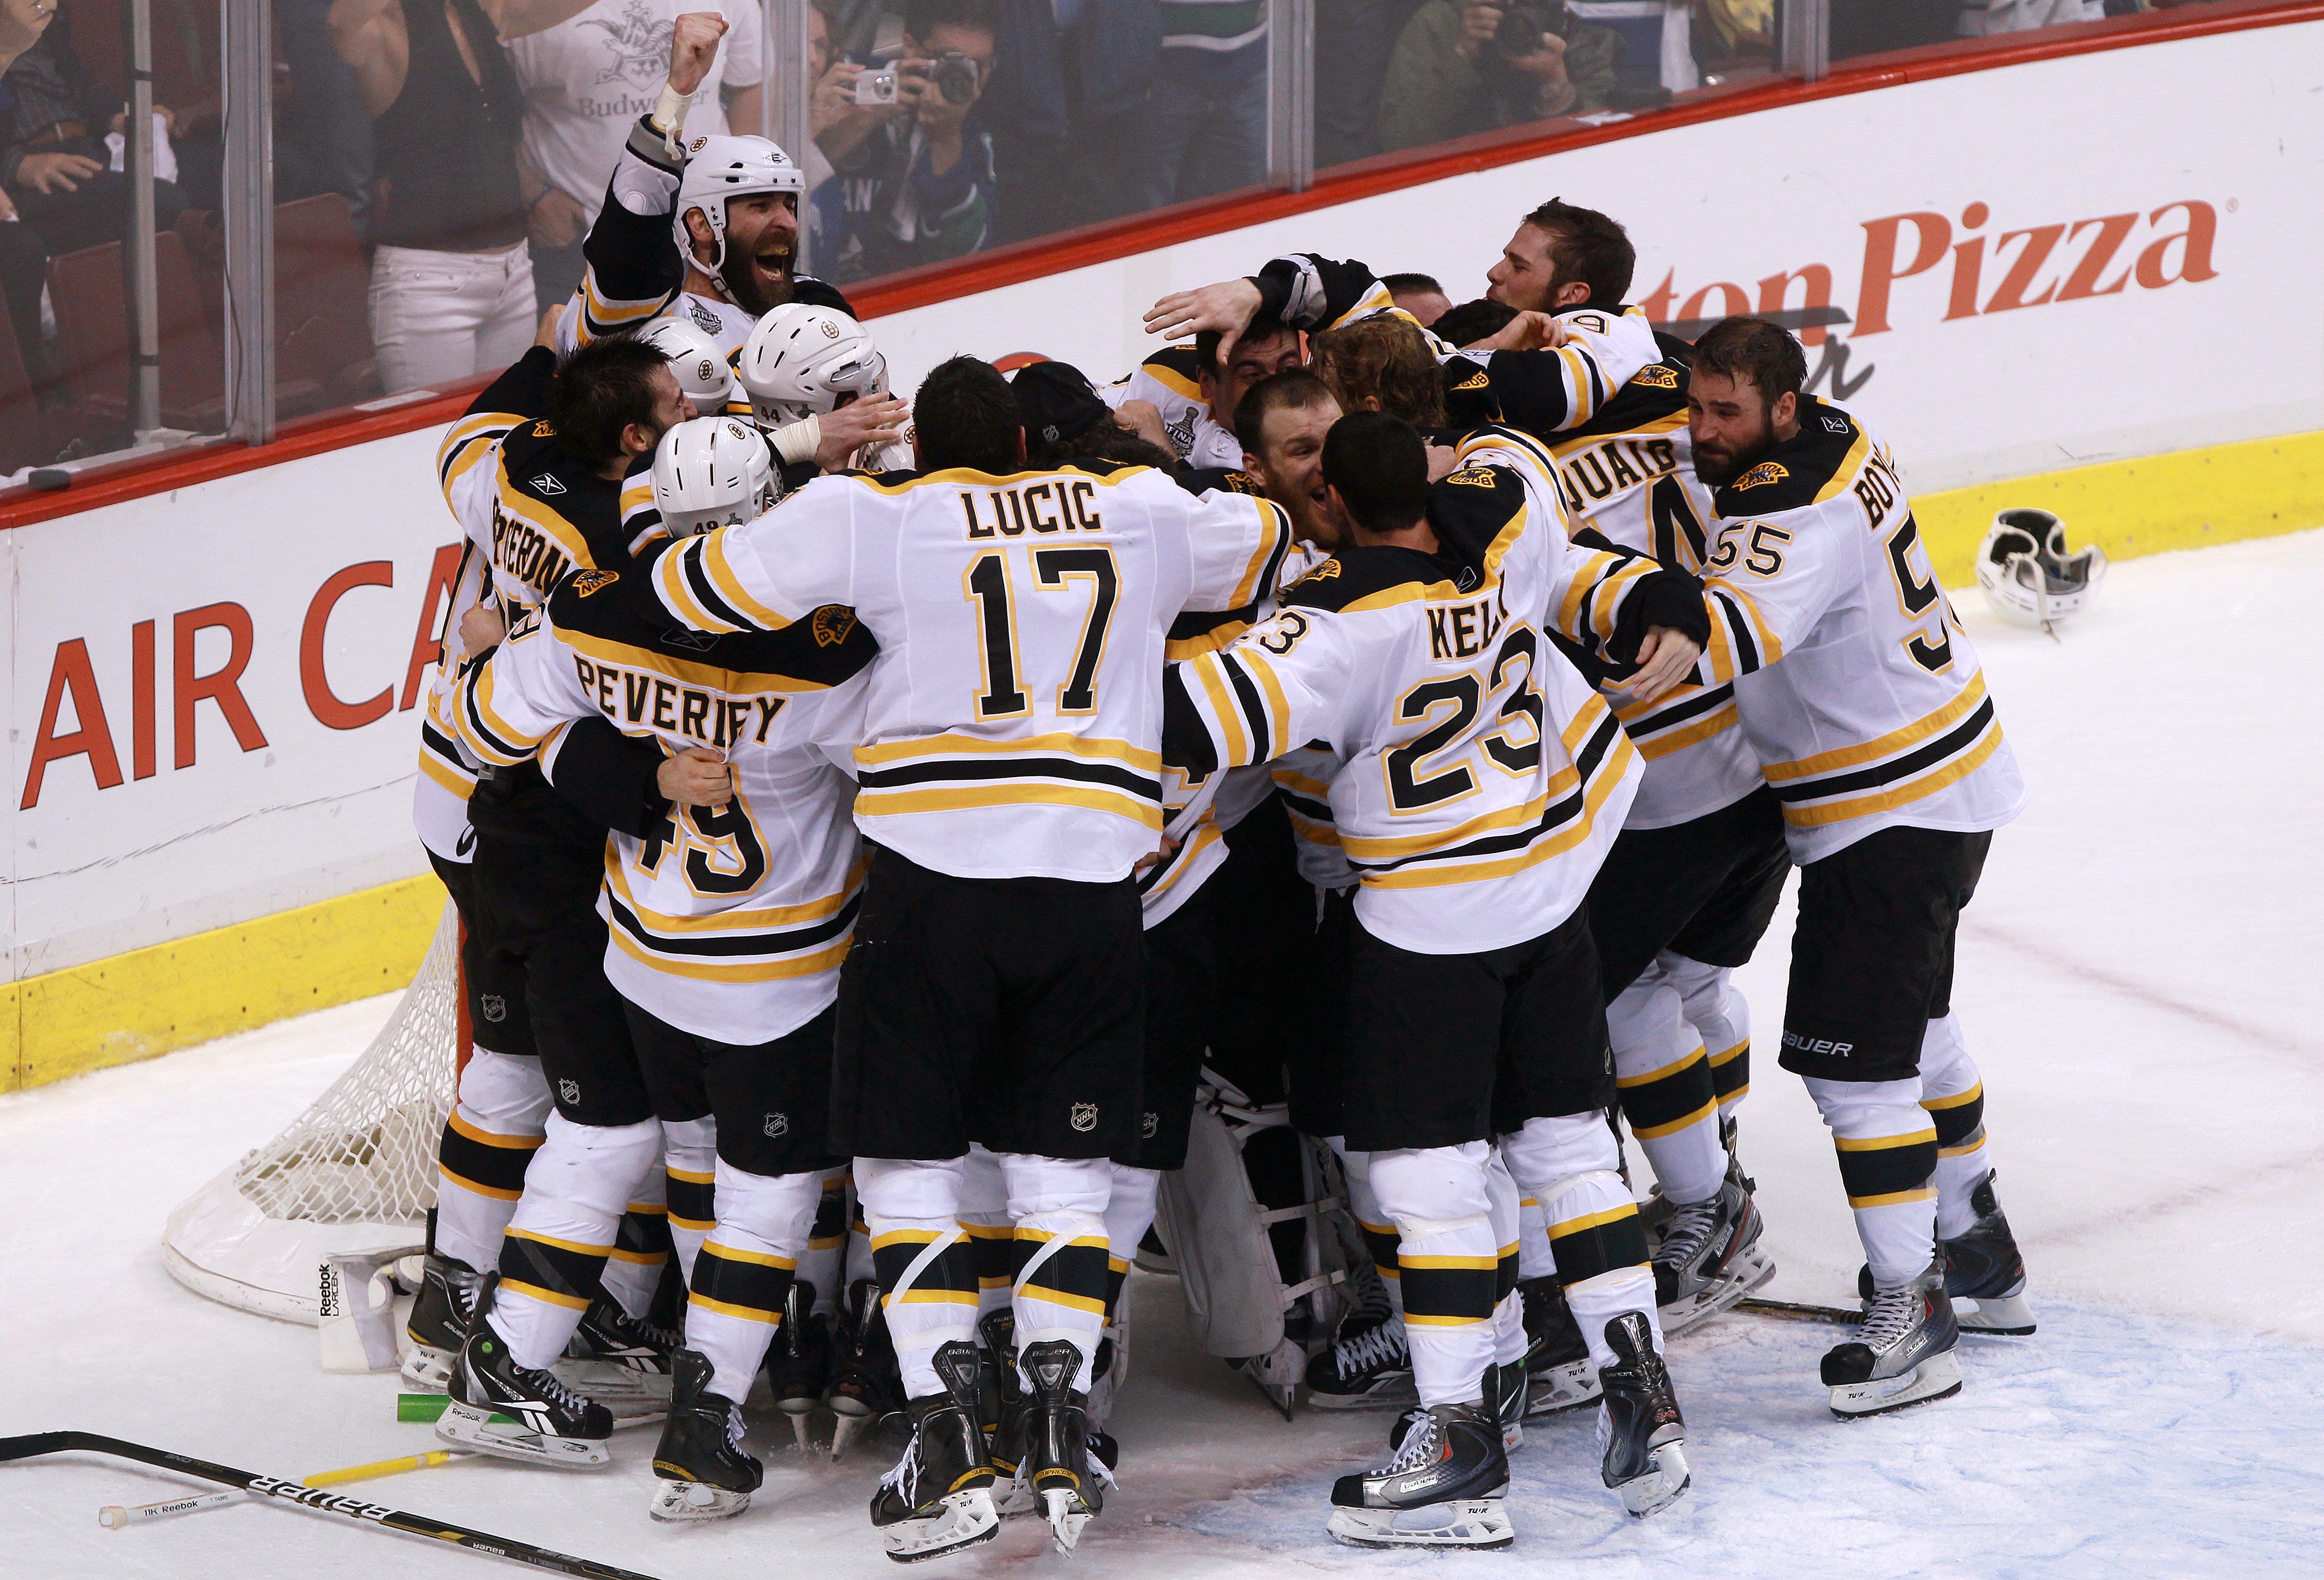 NHL Quiz How Well Do You Know The History Of The Boston Bruins?